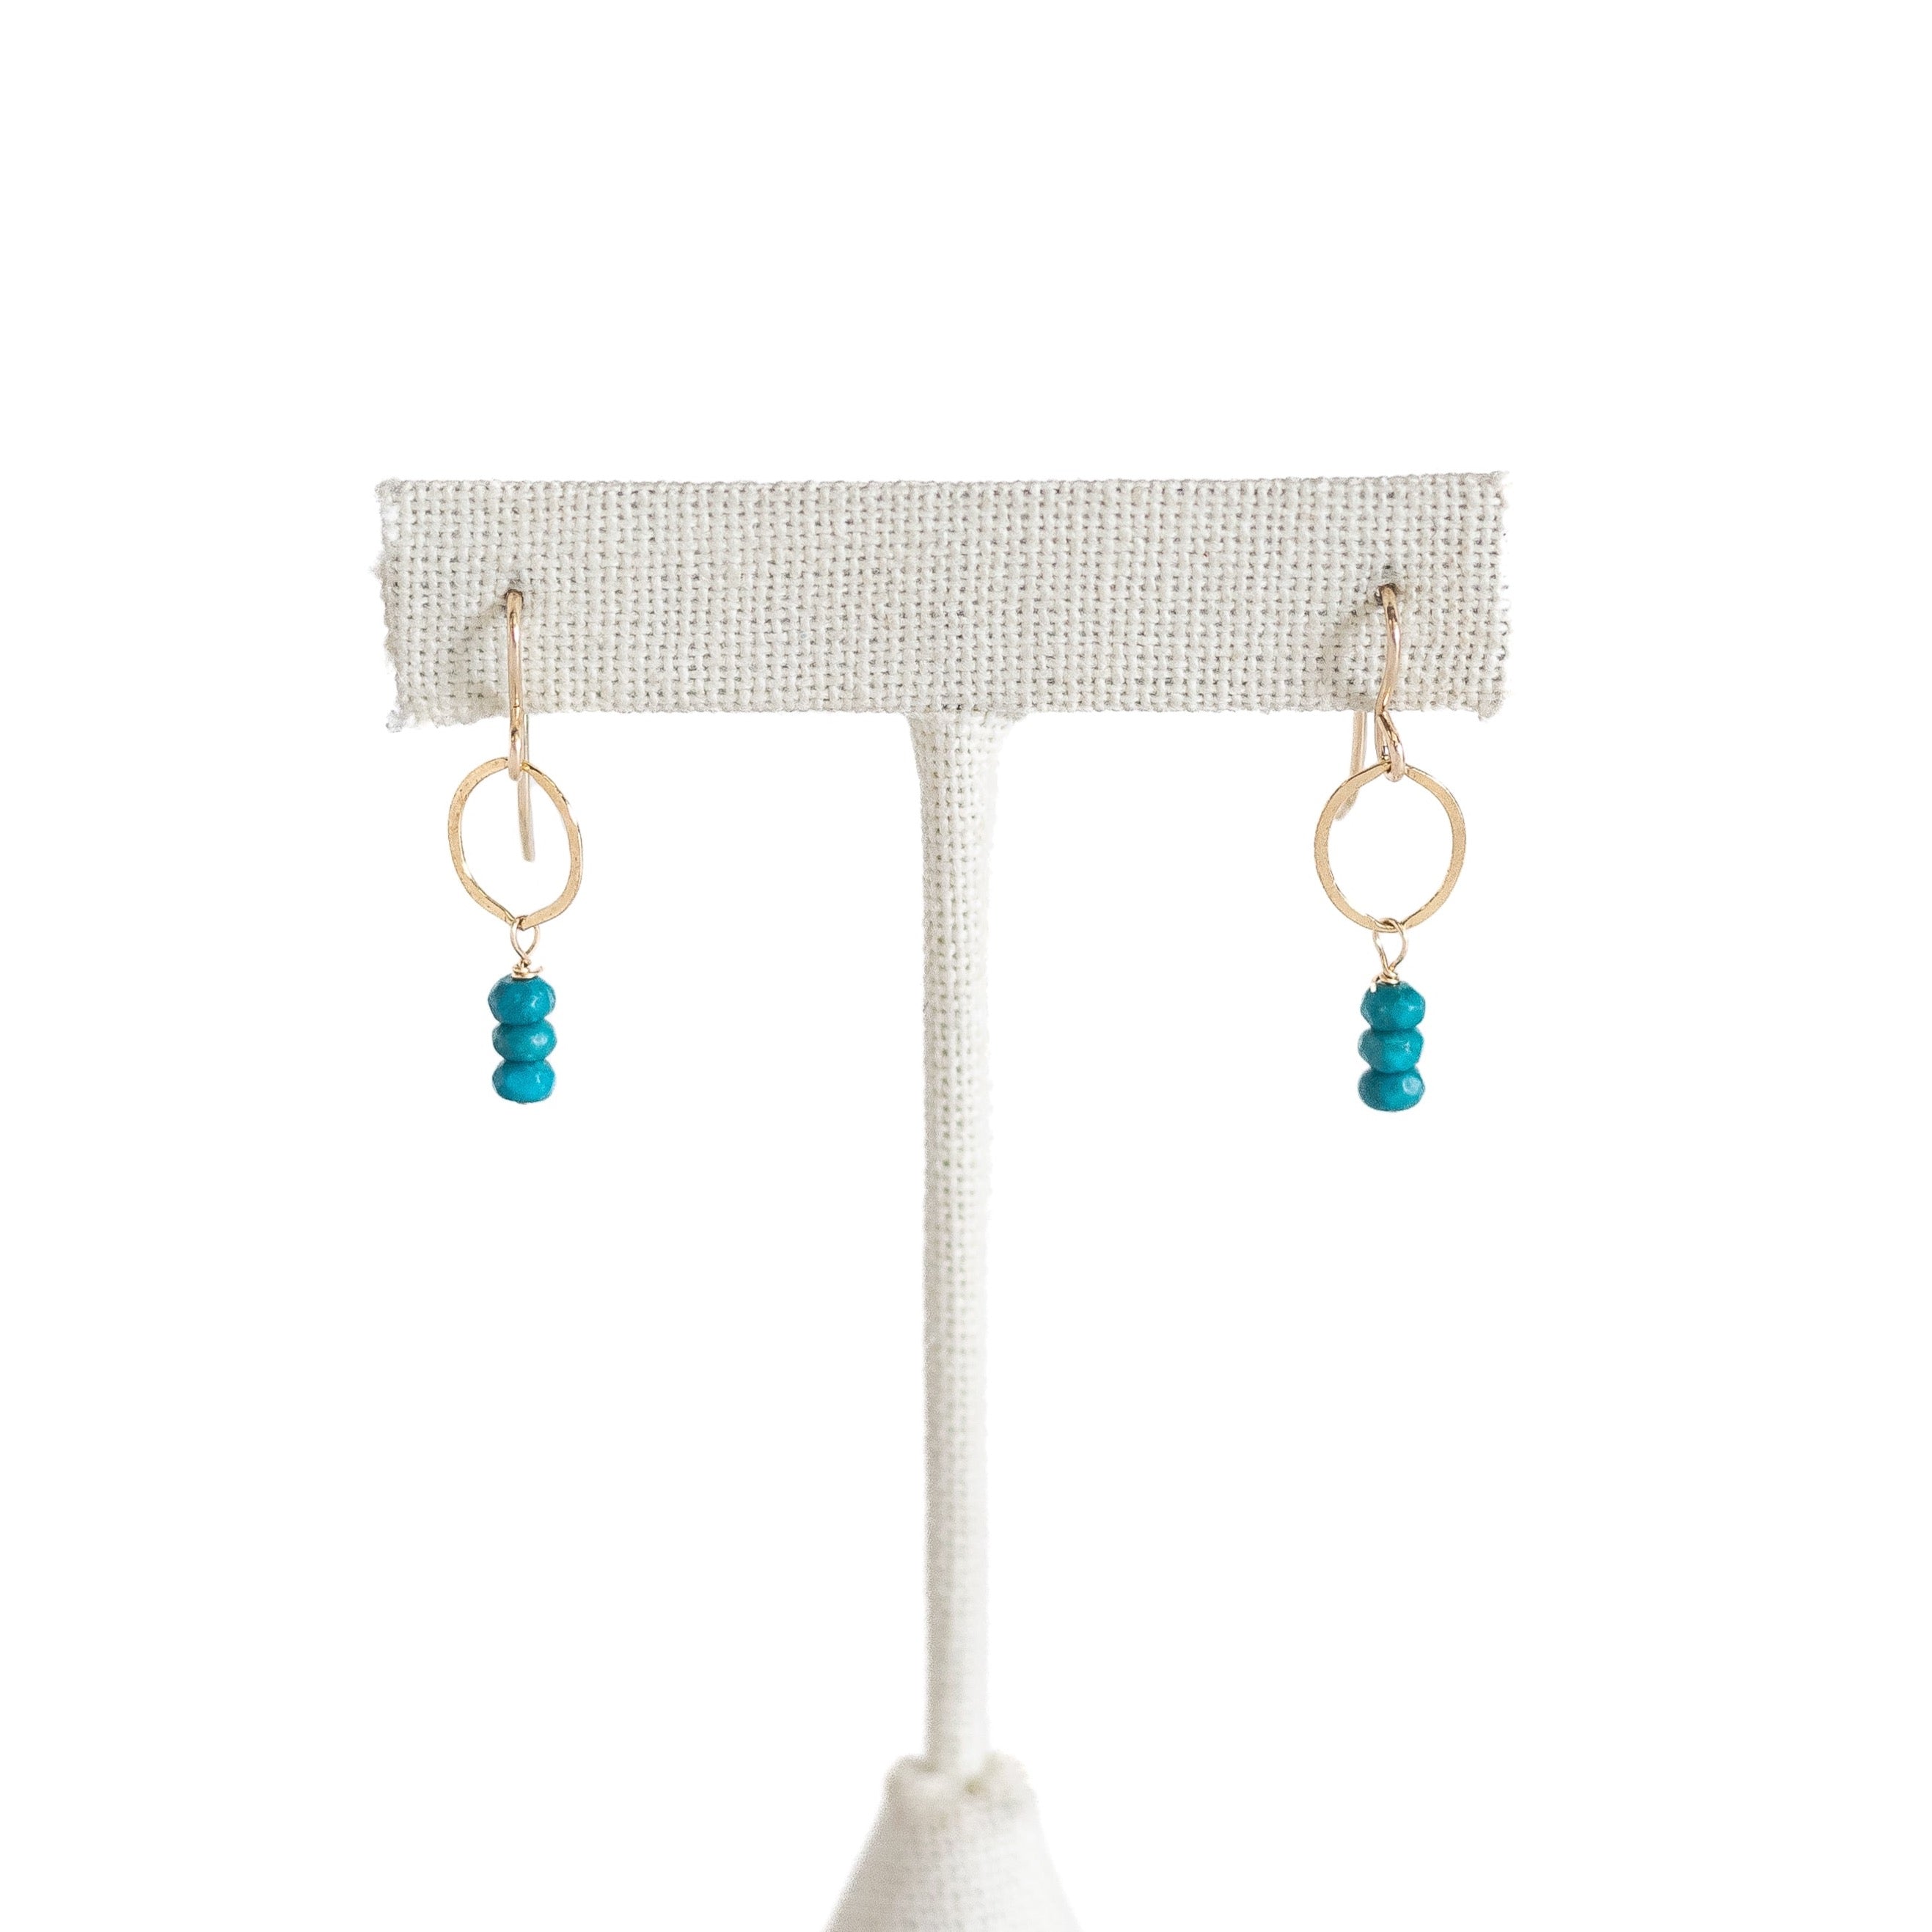 Gold filled tiny hoop with turquoise beads hanging from the bottom of the loop. 